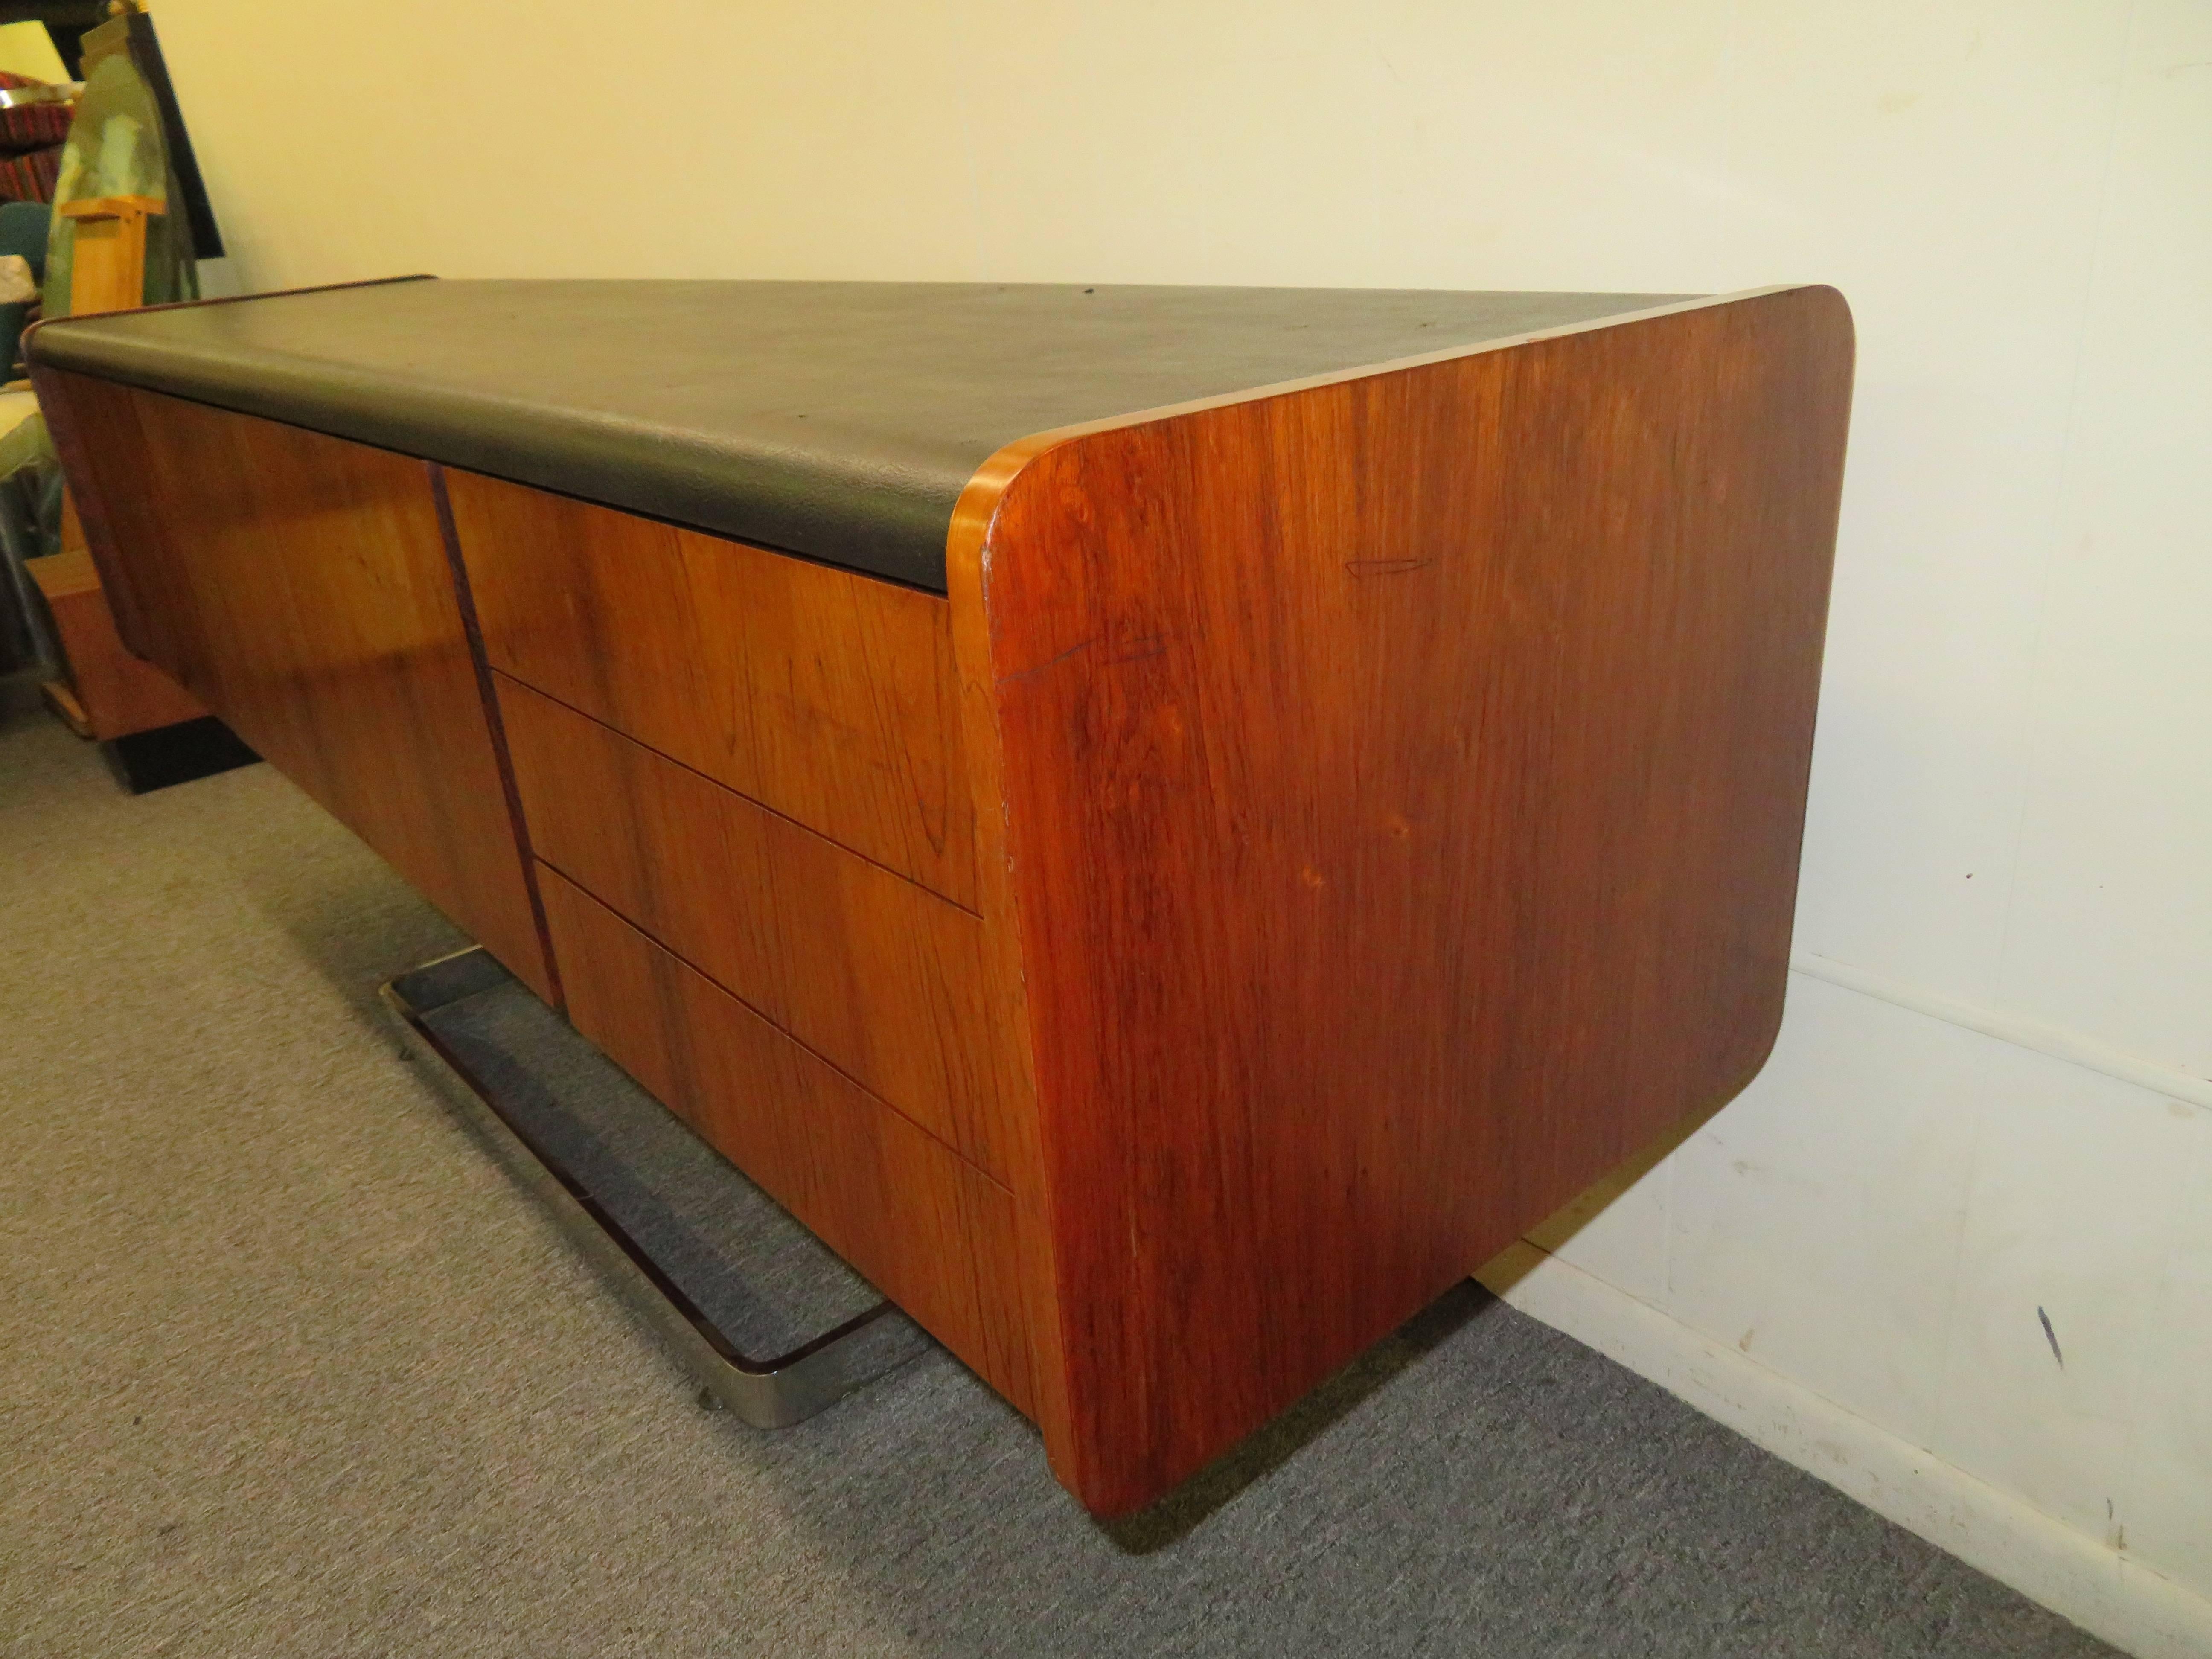 Fabulous Rosewood and Chrome Credenza by Ste. Marie and Laurent In Good Condition For Sale In Pemberton, NJ